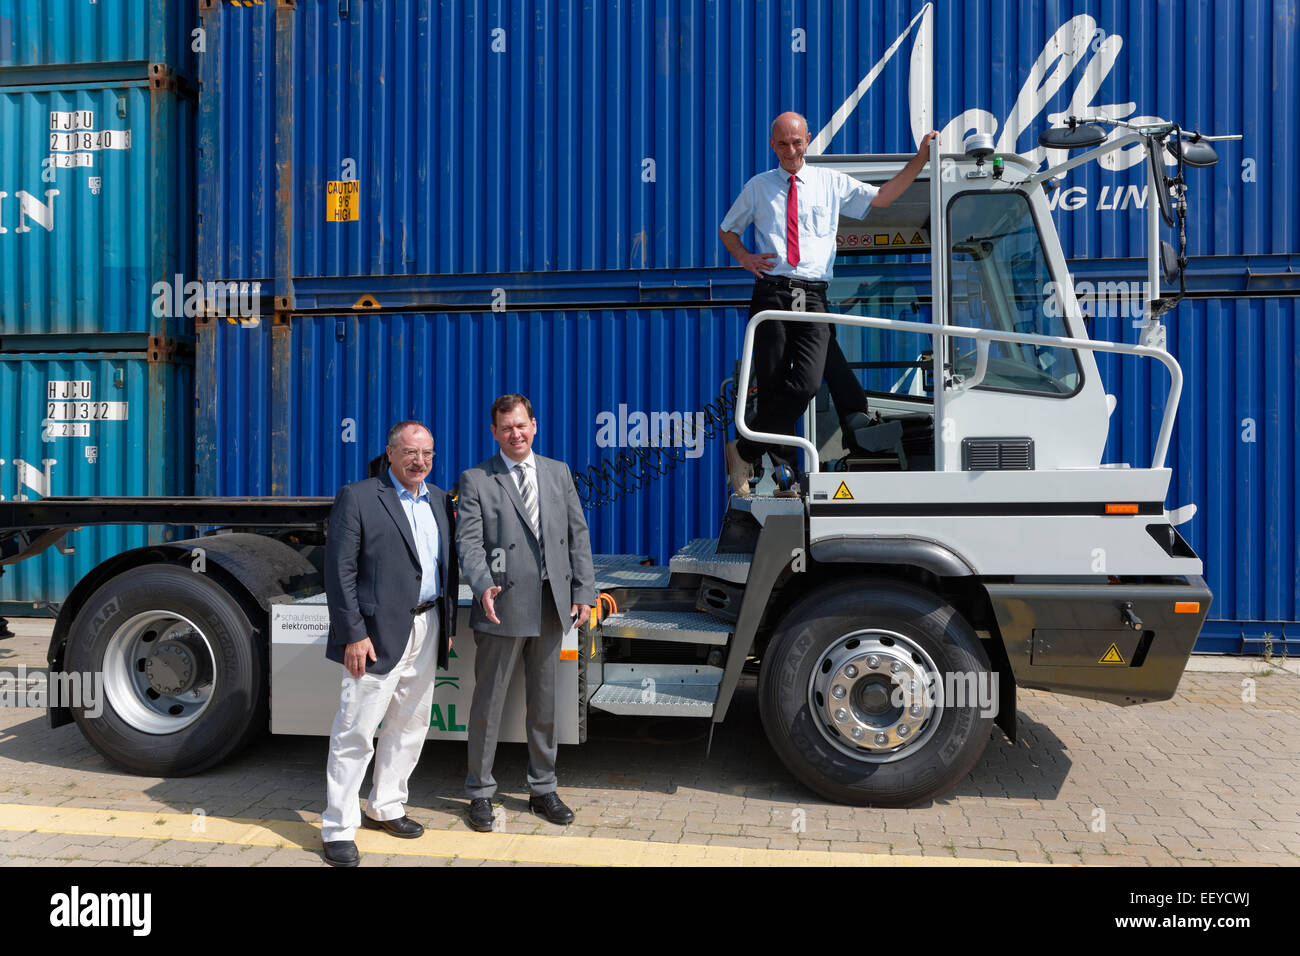 Berlin, Germany, Herbert Sonntag, Peter StÃ¤blein and Carsten Giese at an electric truck Stock Photo